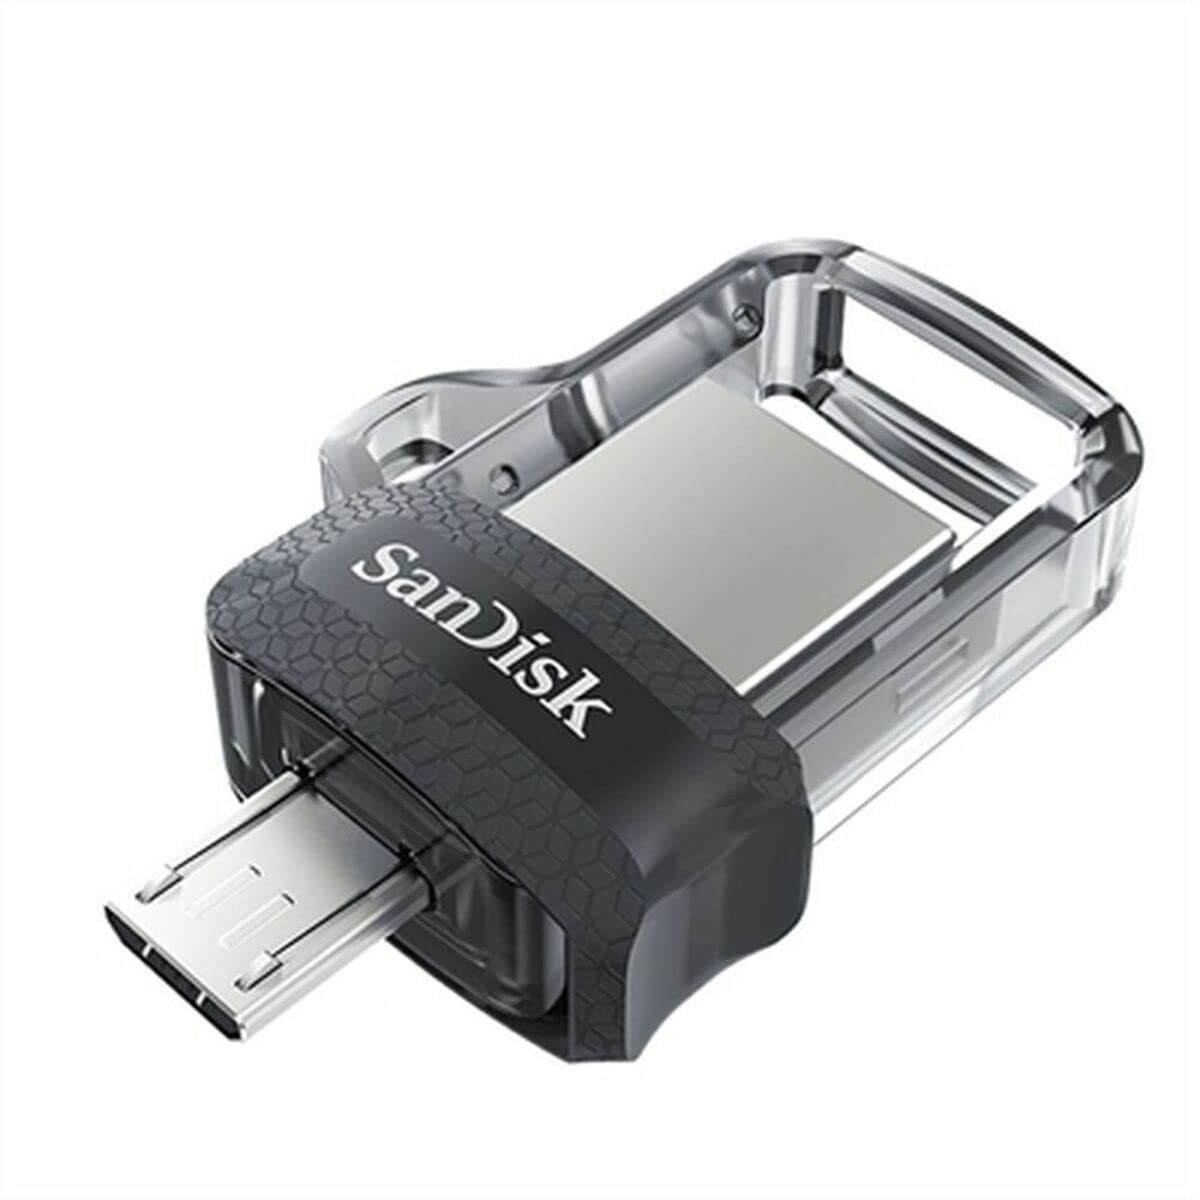 128GB SanDisk Ultra Dual Drive m3.0 w/ microUSB + USB 3.0 Type-A $10 $9.99 + Free Shipping w/ Prime or on $25+